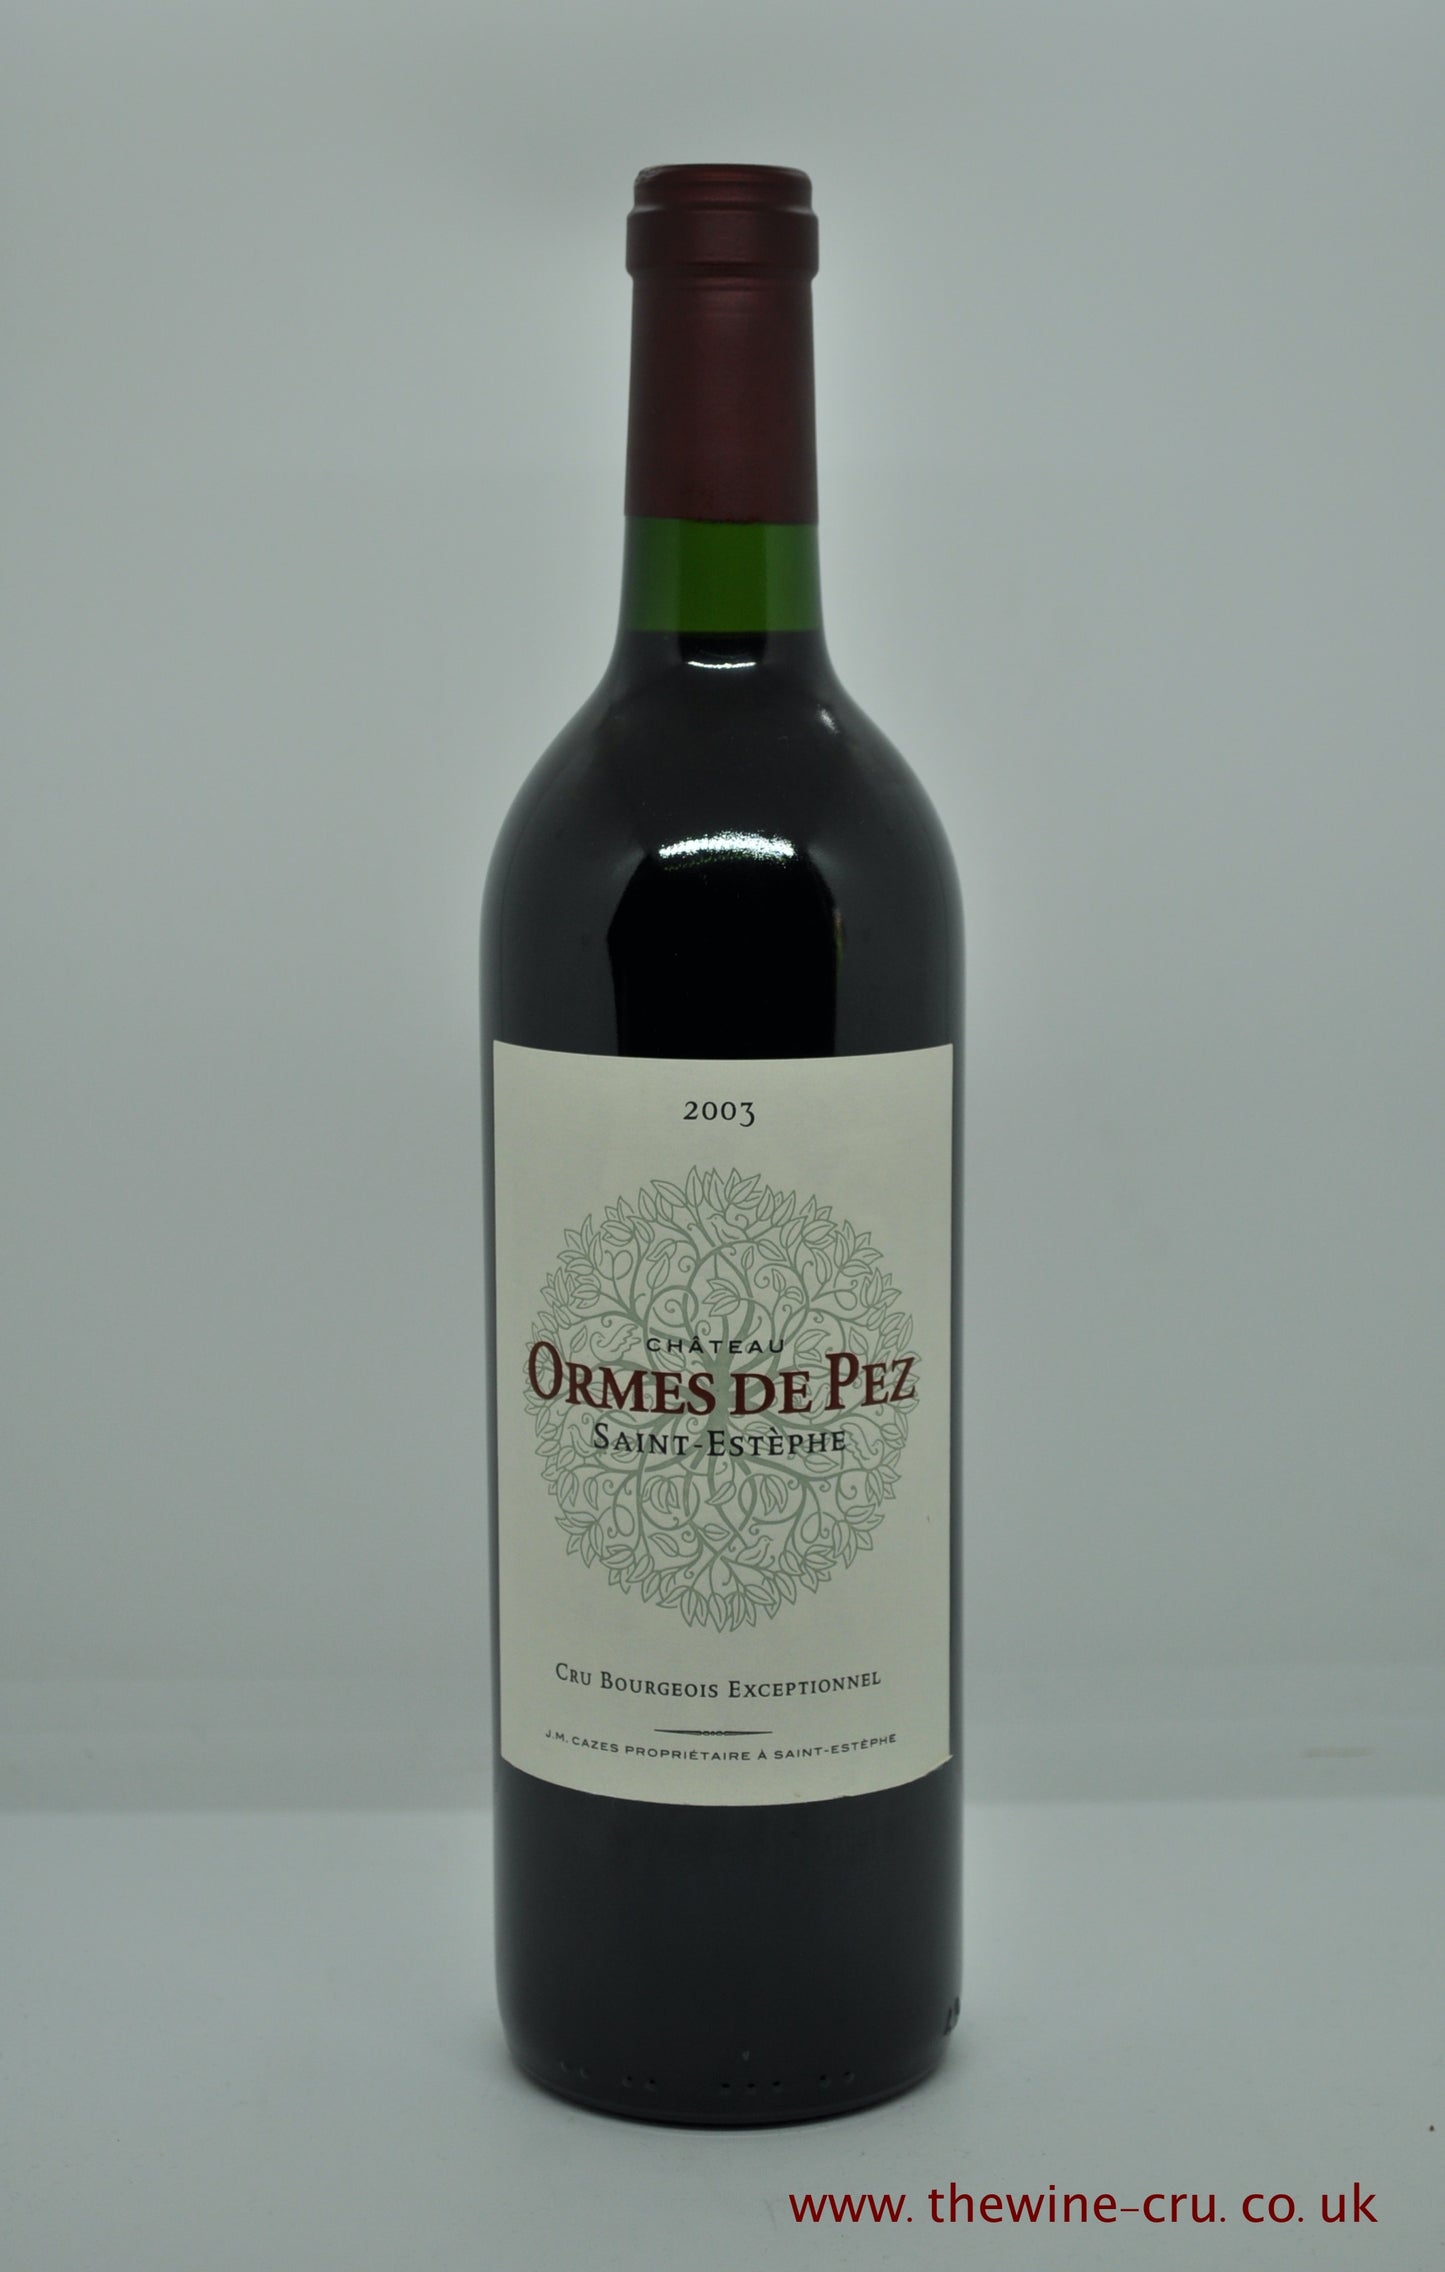 A 2003 vintage red wine from Chateau Ormes De Pez, Saint Estephe, Bordeaux, France. The bottles are in excellent condition. Immediate delivery. Free local delivery. Gift wrapping available.